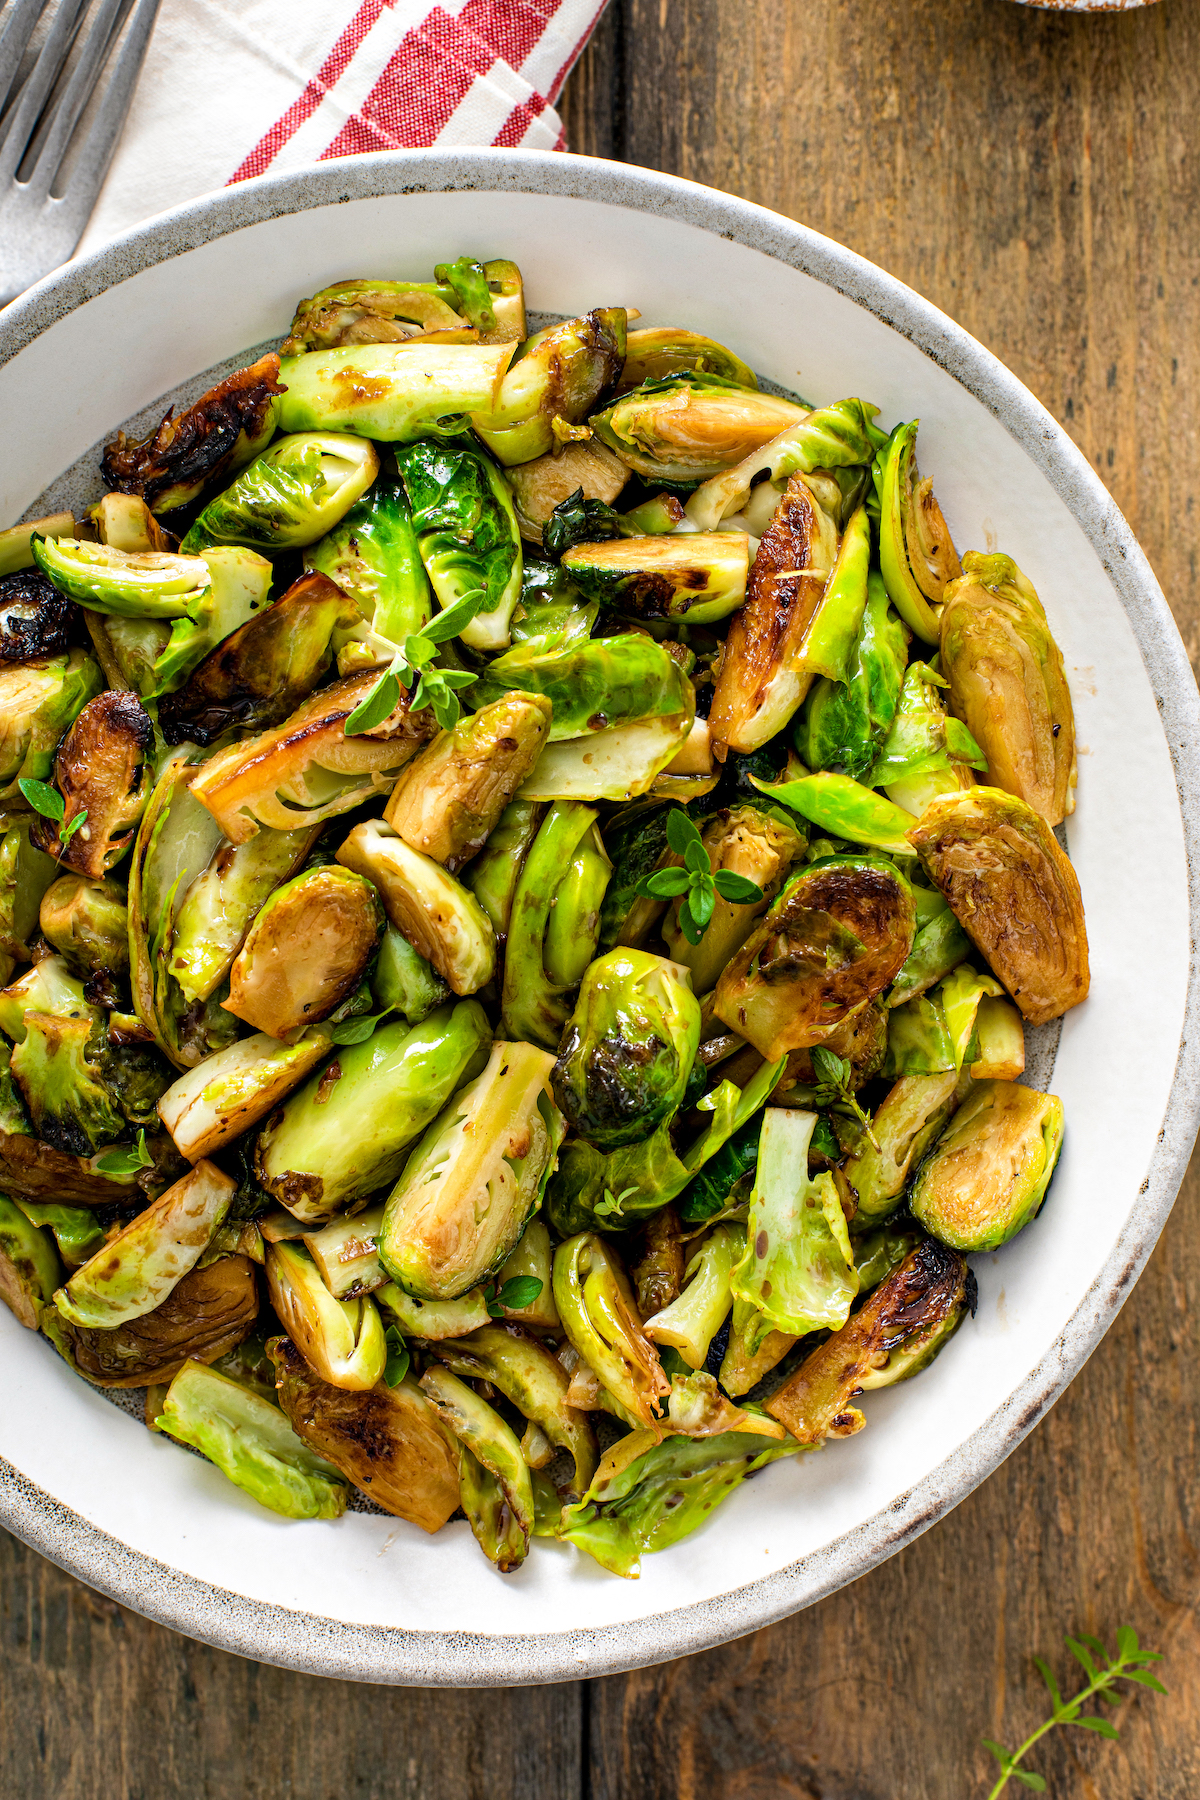 Sauteed brussel sprouts with balsamic glaze in a dish.